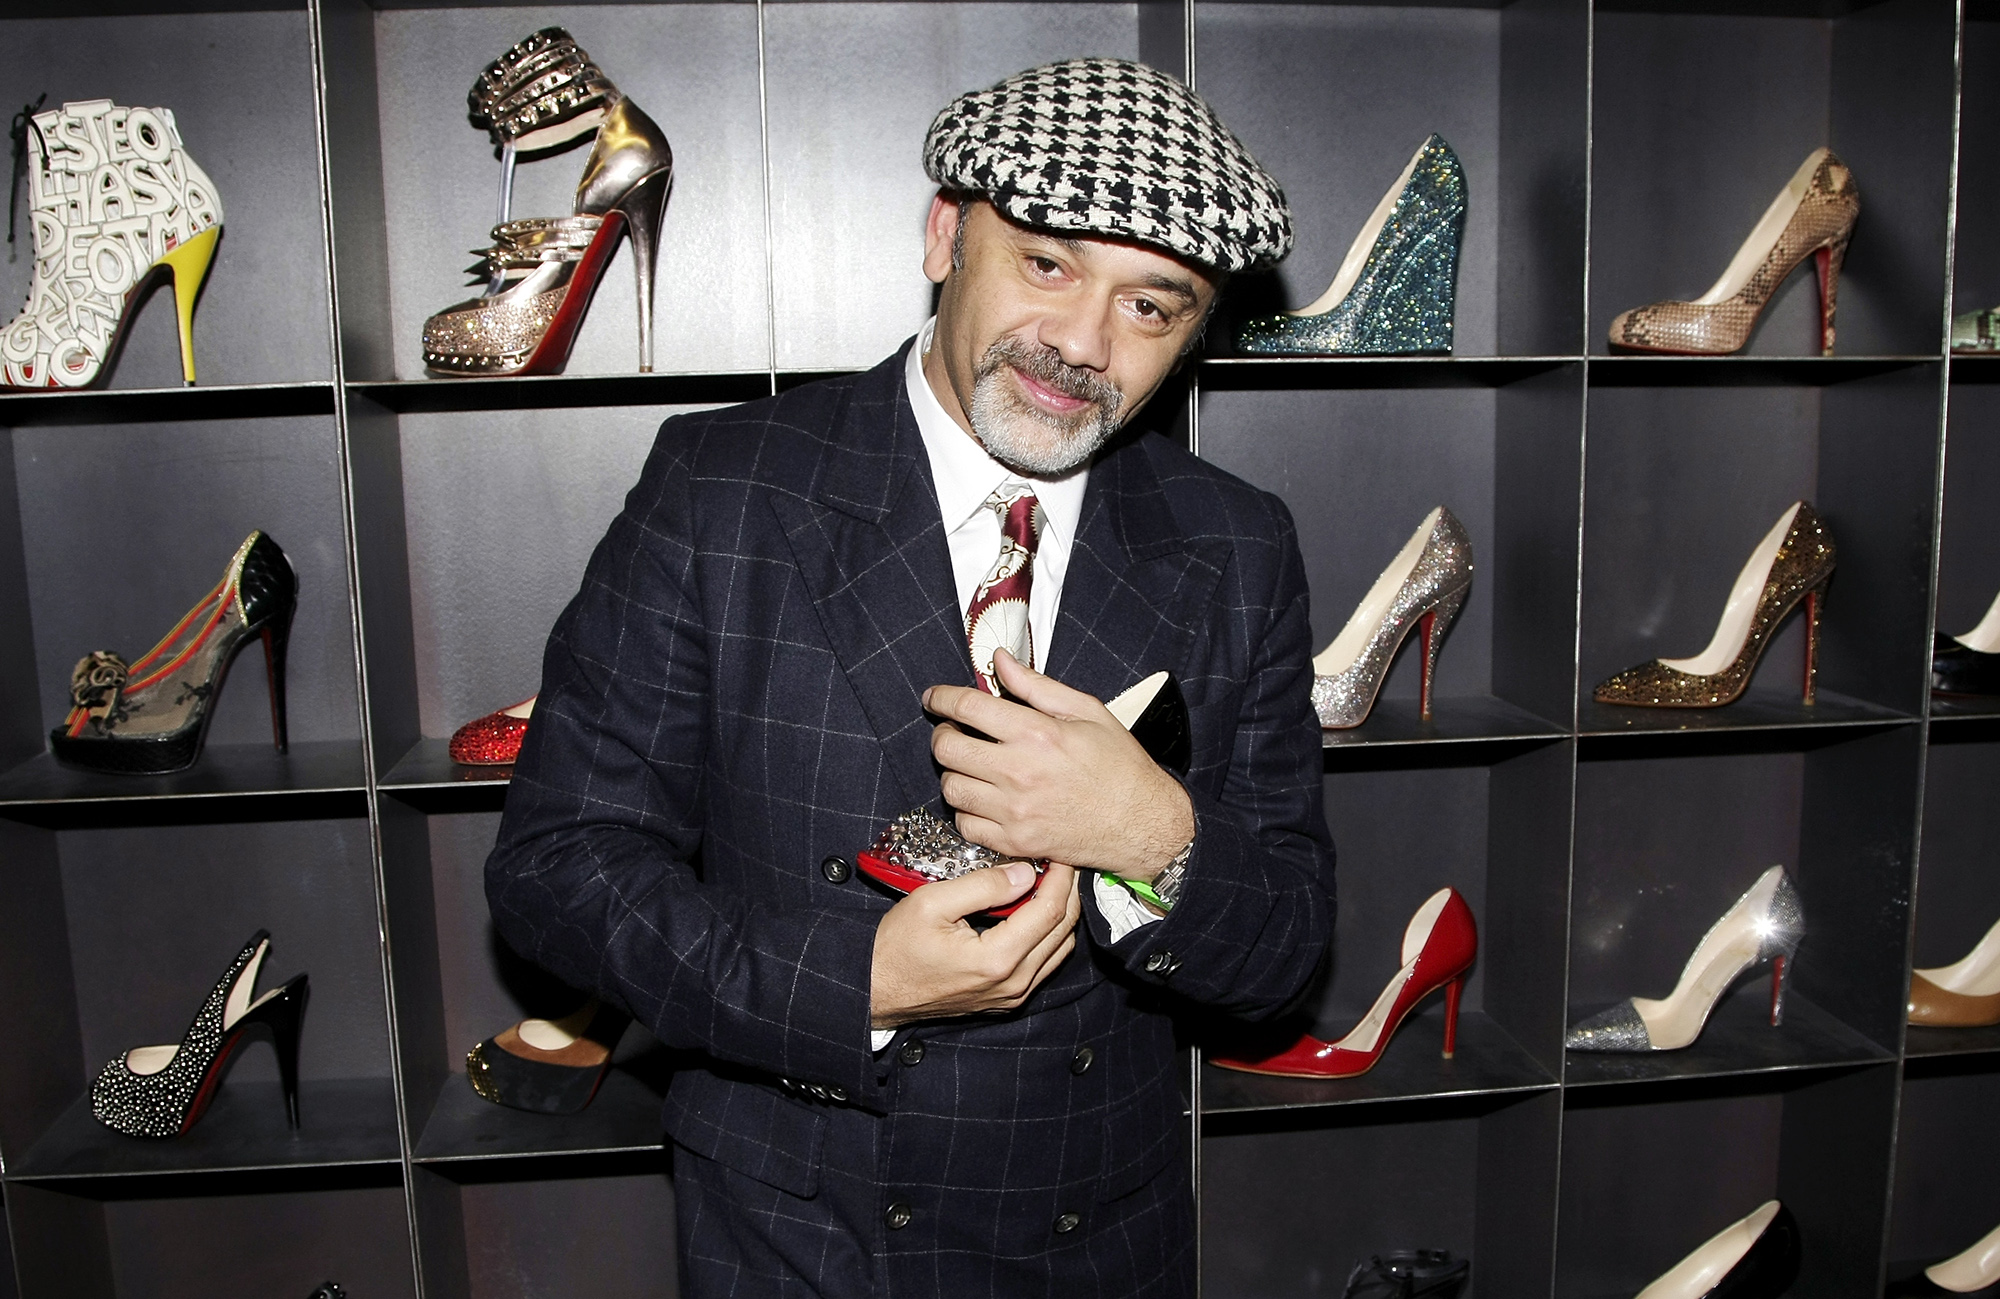 Christian Louboutin on men's footwear and those prized